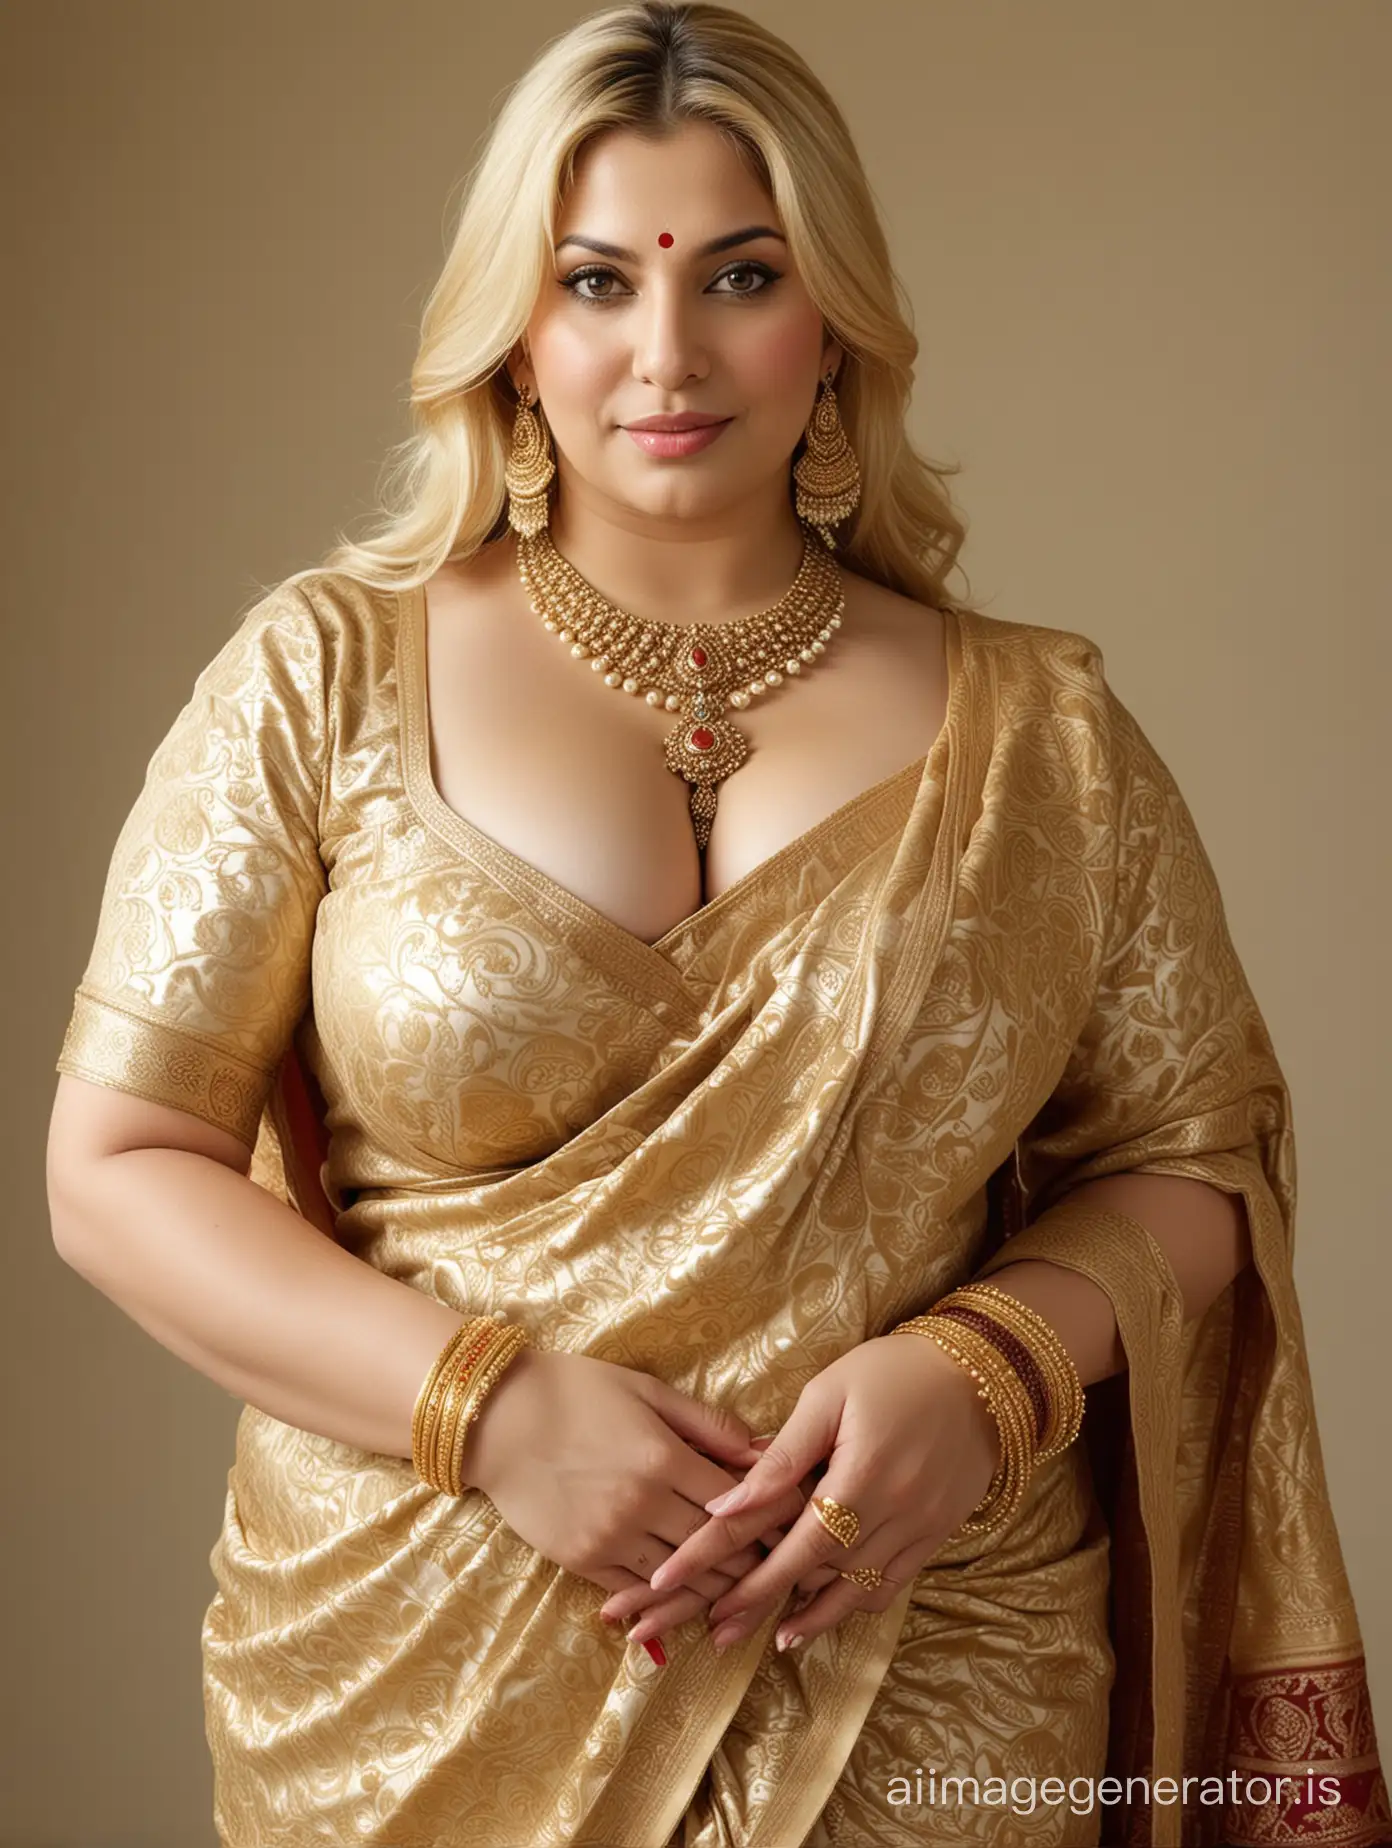 Generate full body image of a 40 year old very busty breast fatty breast, fatty big butt , fatty big hand arm , fatty big thighs and curvy completely American woman with very fair skin, blonde hair and wearing full body gold jewellery necklace and wearing Indian traditional style banarasi saree in wedding program